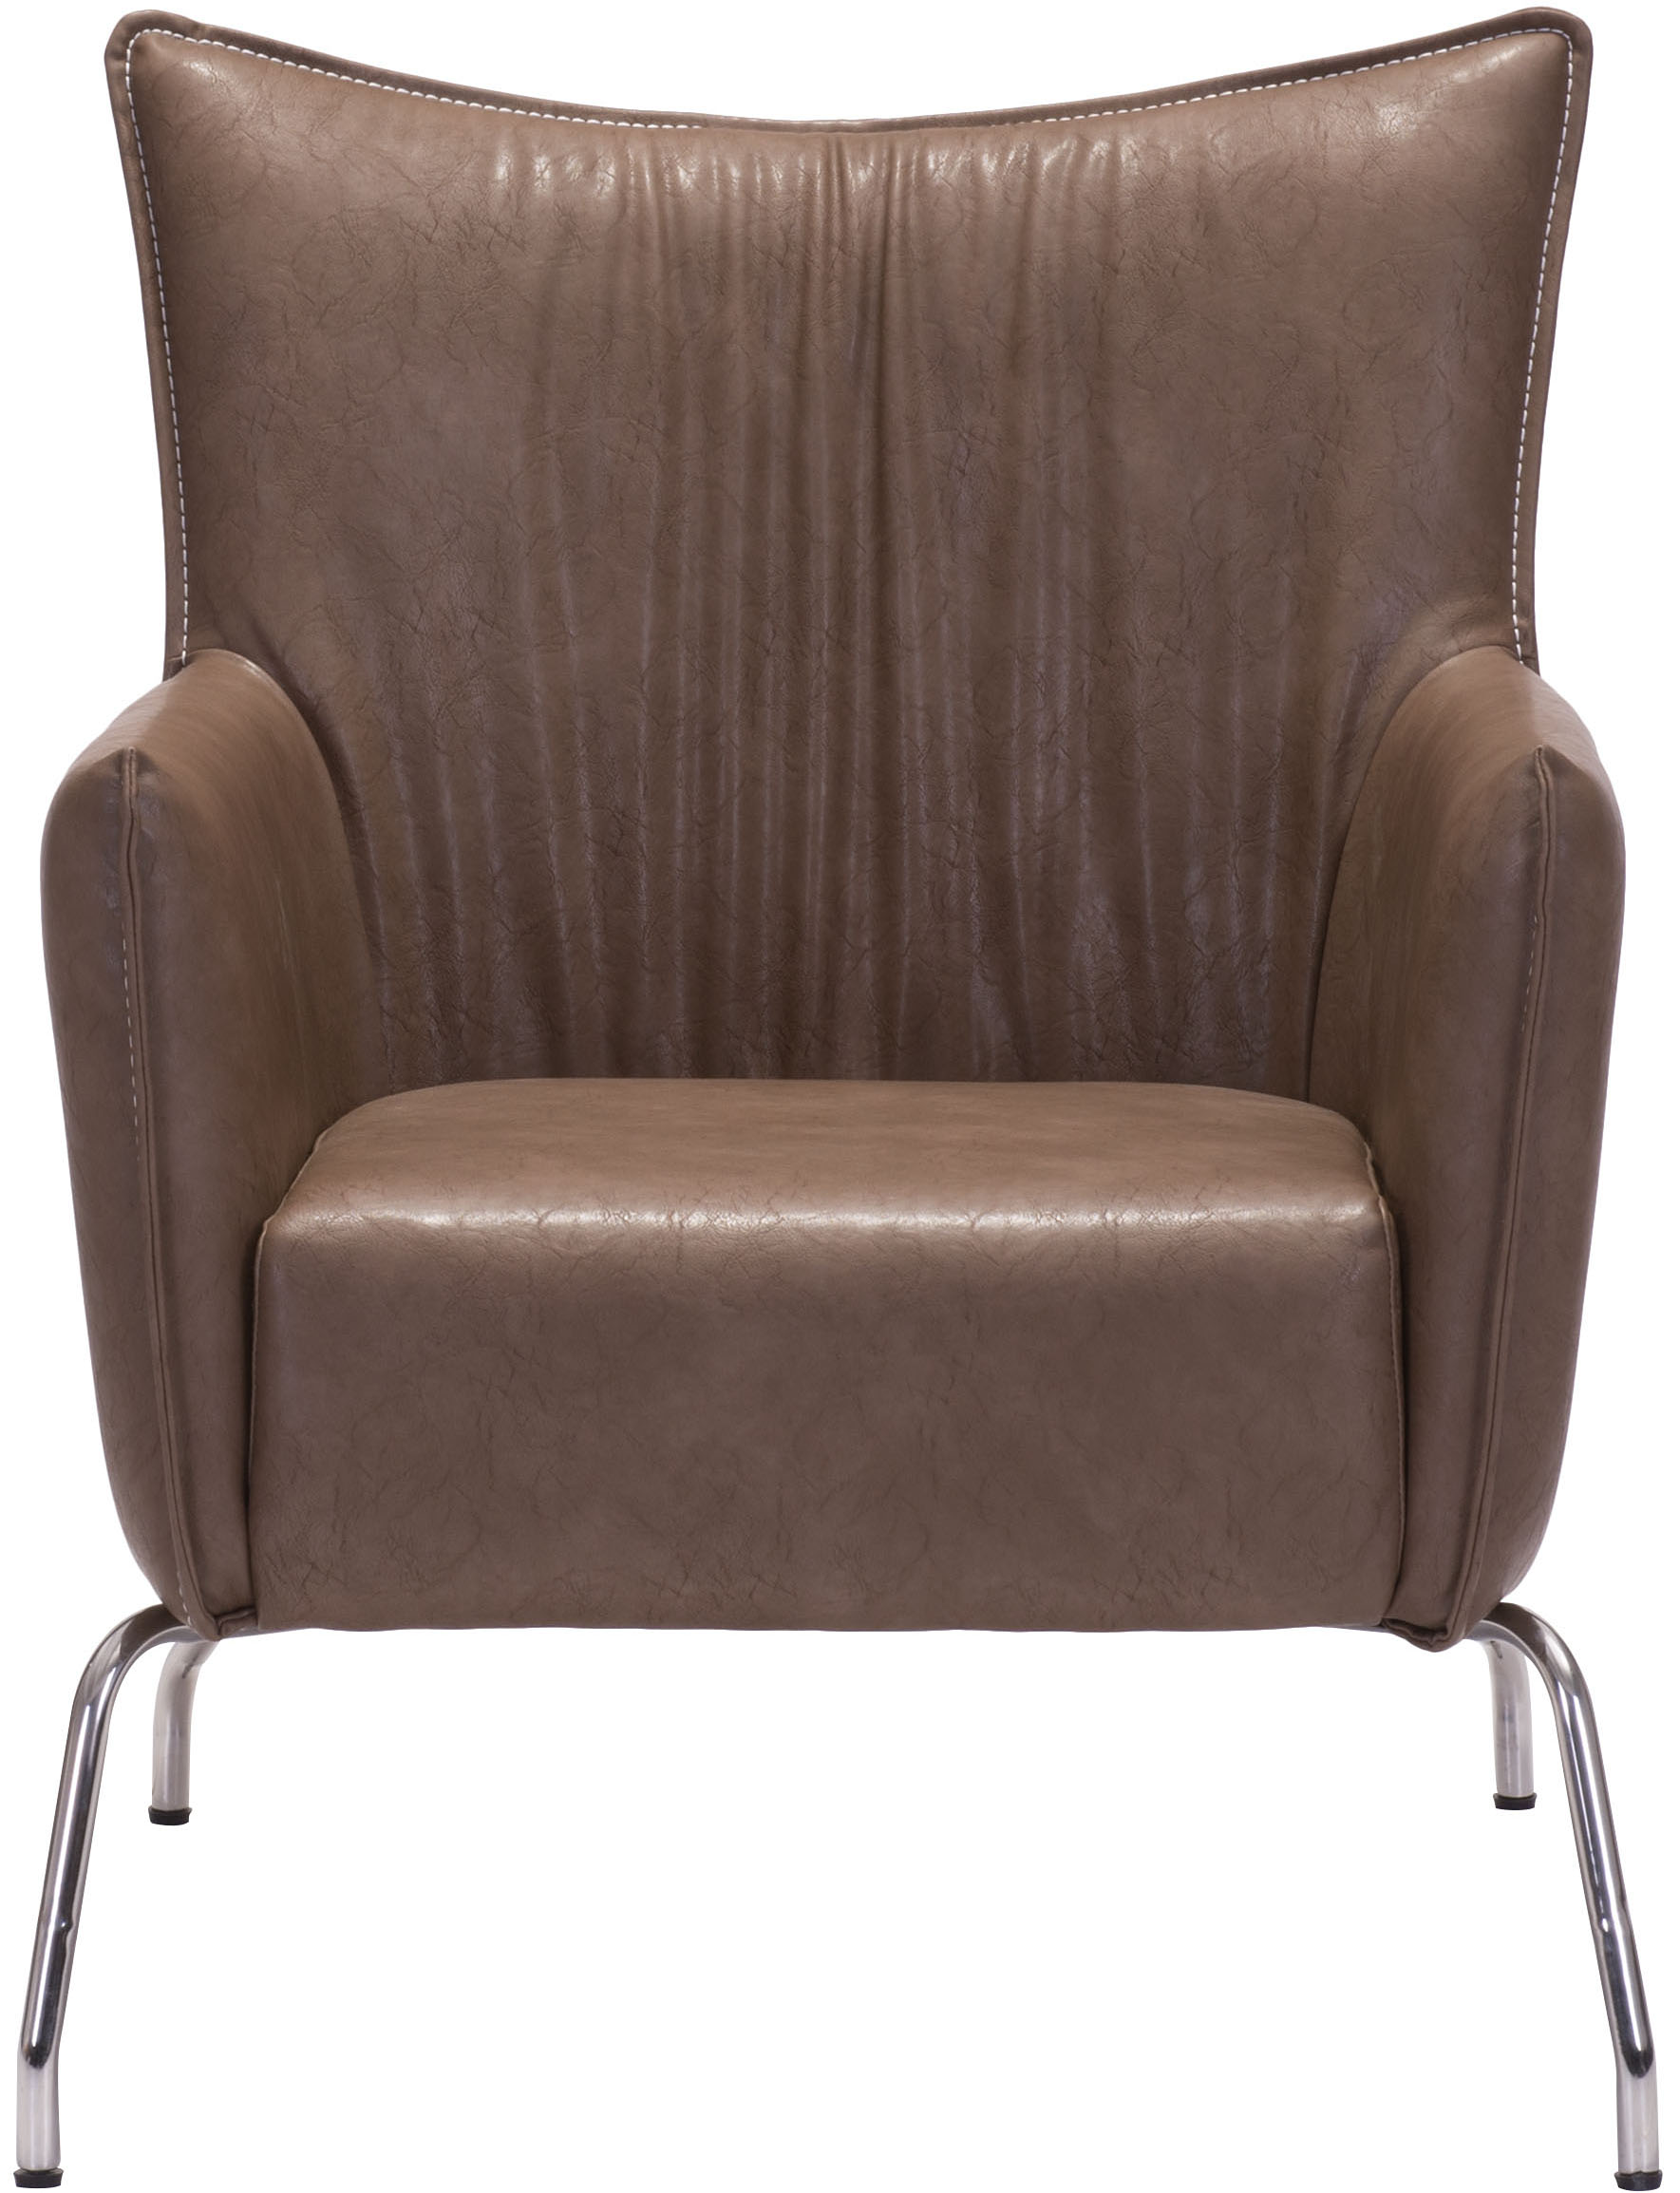 Ostend Occasional Chair Saddle Brown